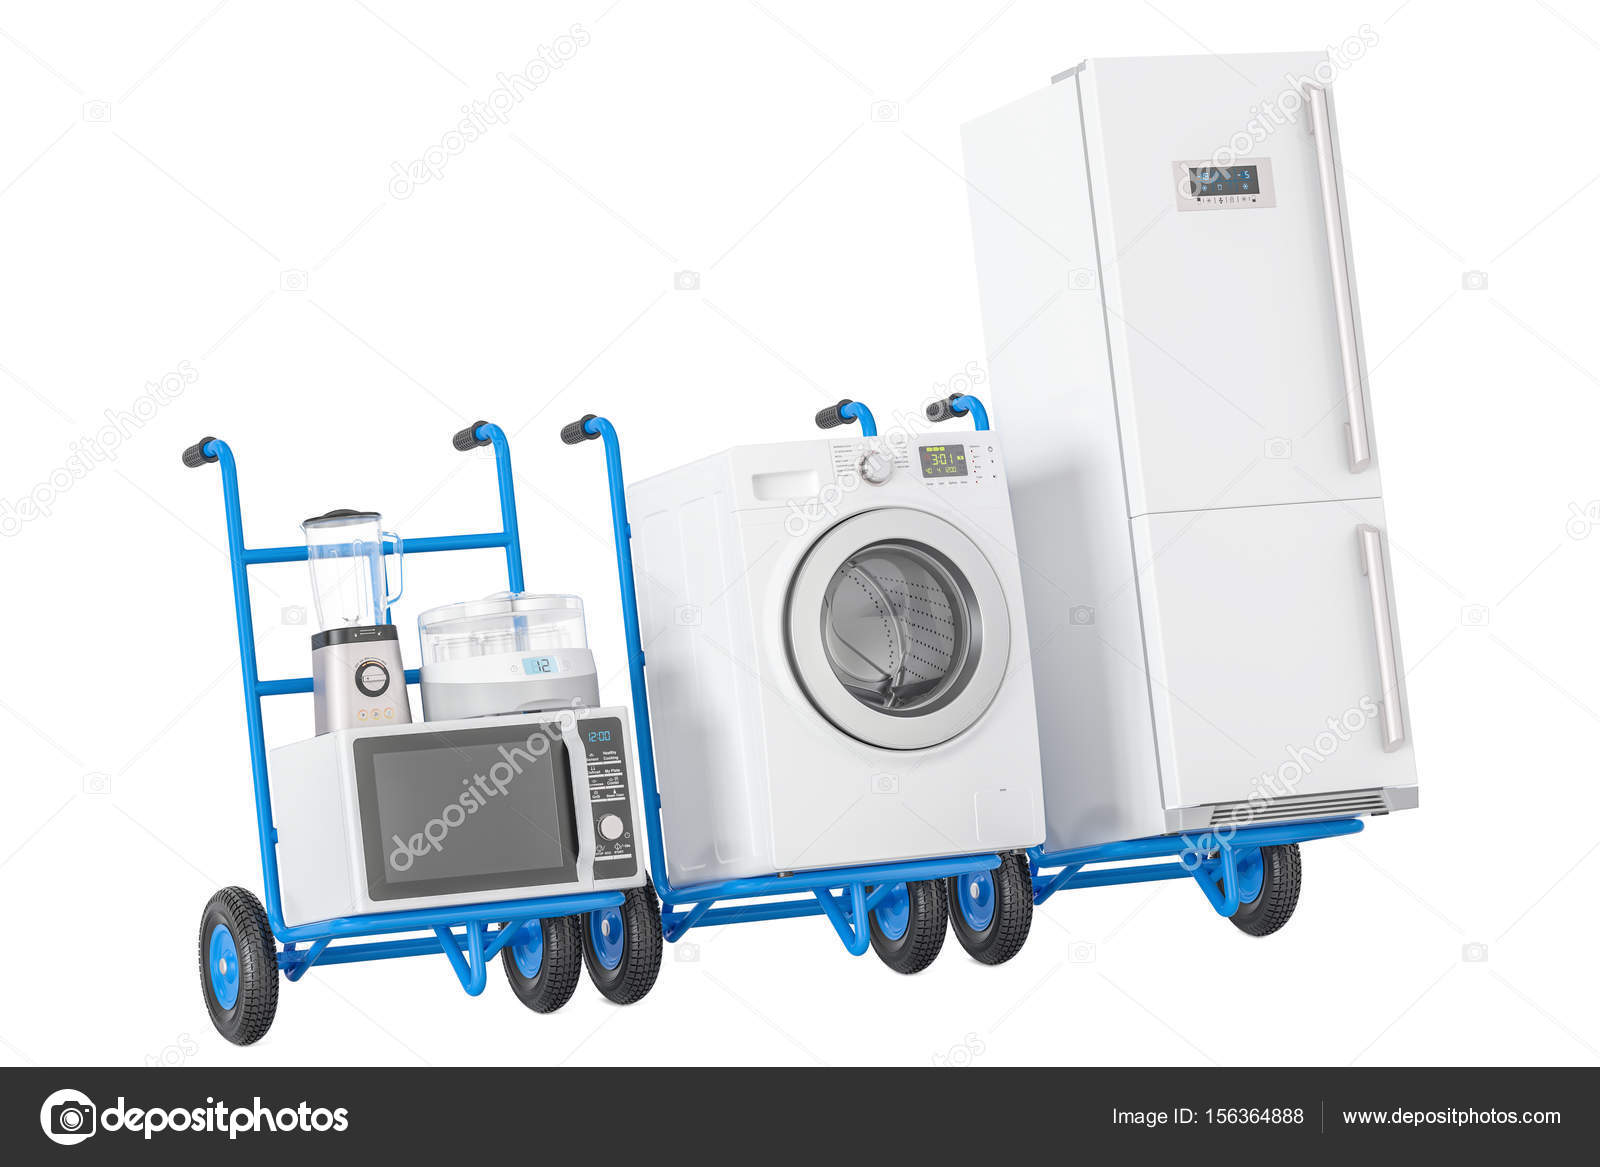 Appliance delivery. Hand truck, fridge, washing machine and microwave oven., Stock image